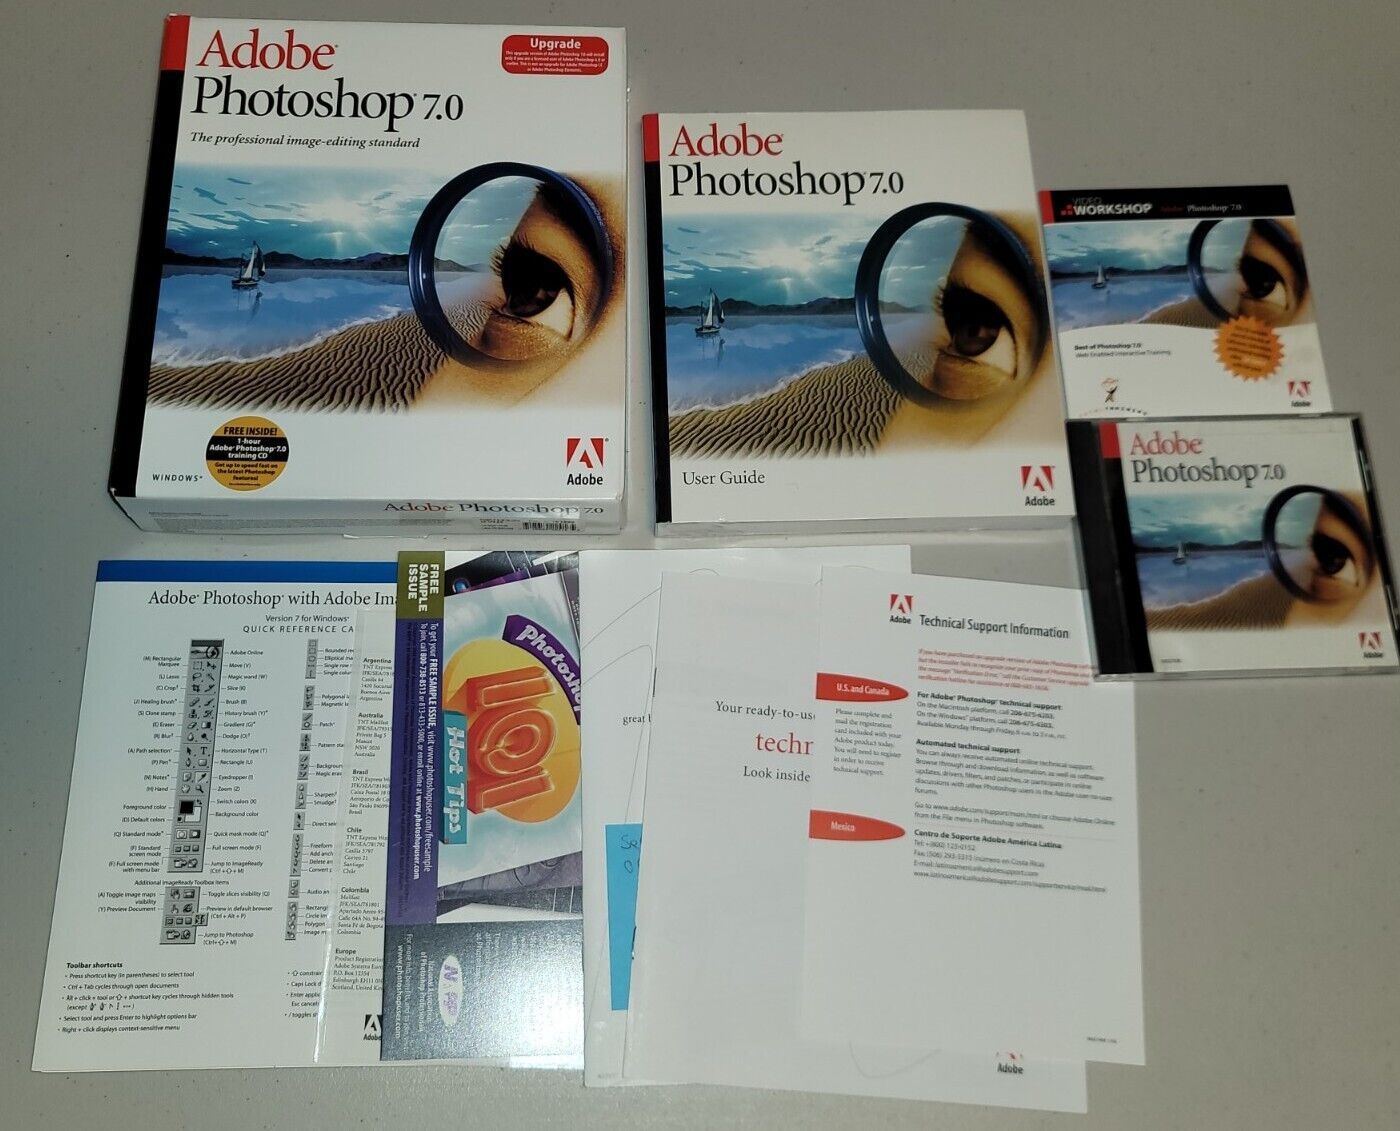 Adobe Photoshop 7.0 Windows UPGRADE 7 Software PC w Serial Number + Inserts